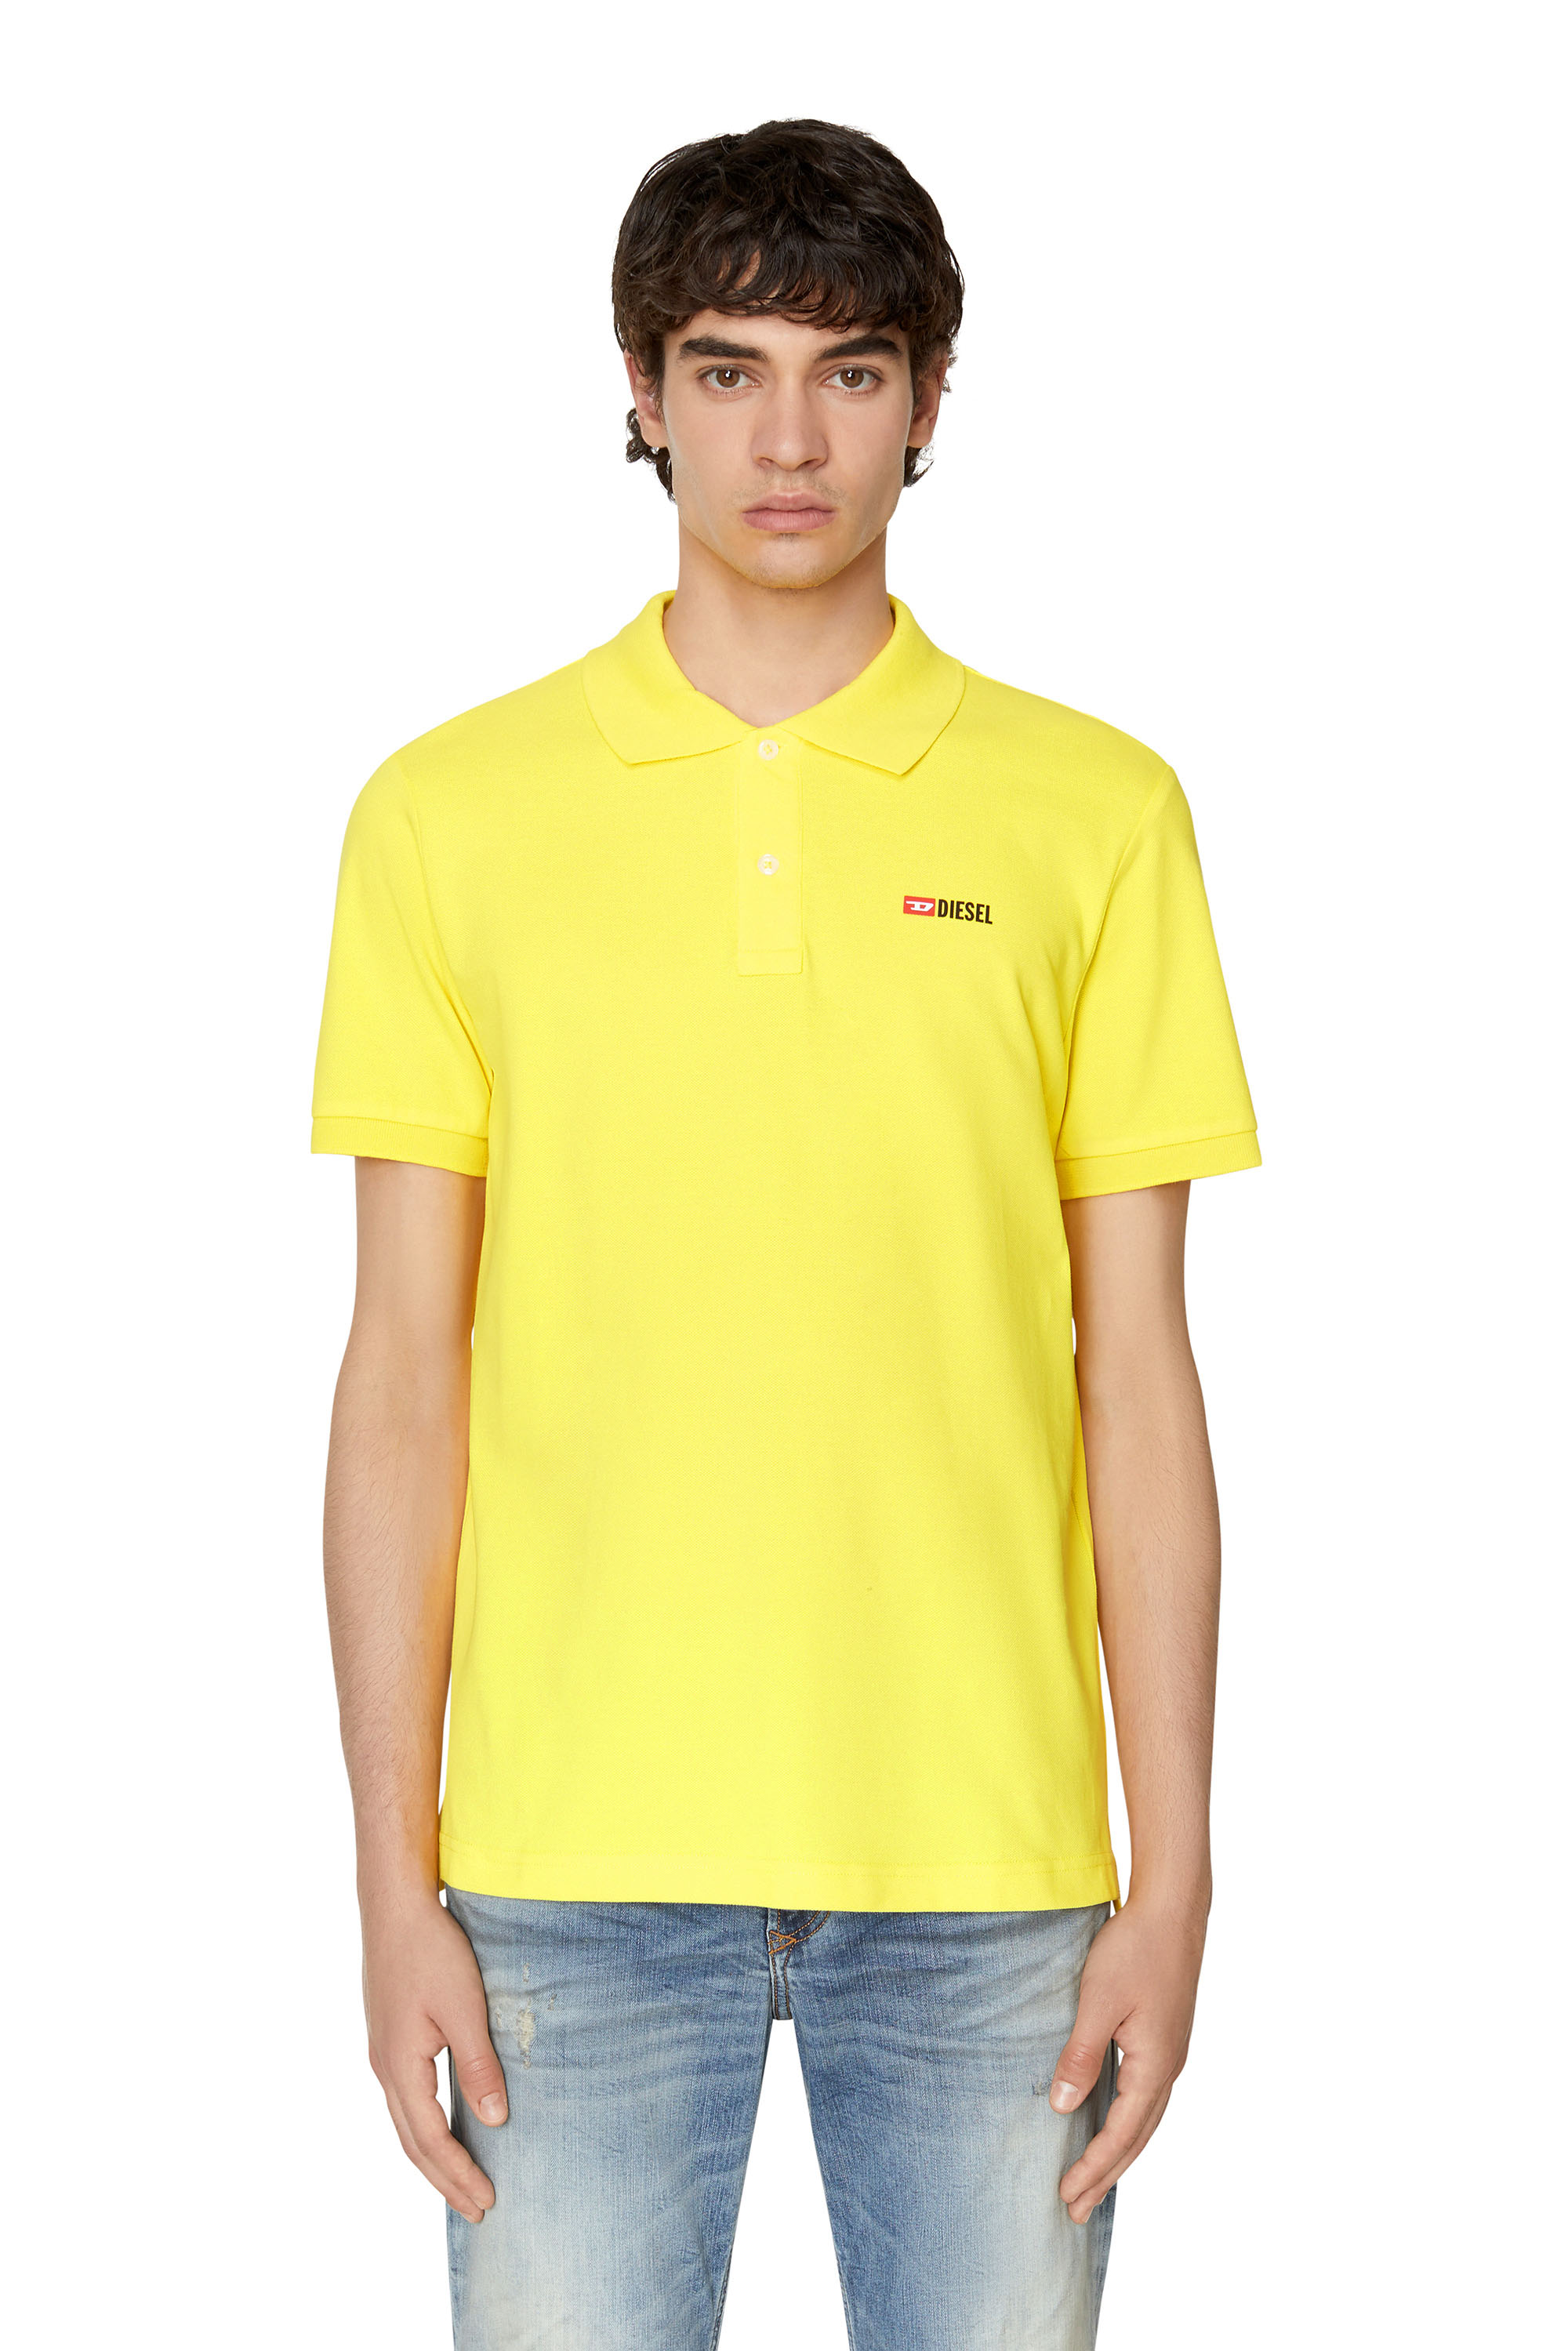 Diesel - T-SMITH-DIV, Yellow - Image 1